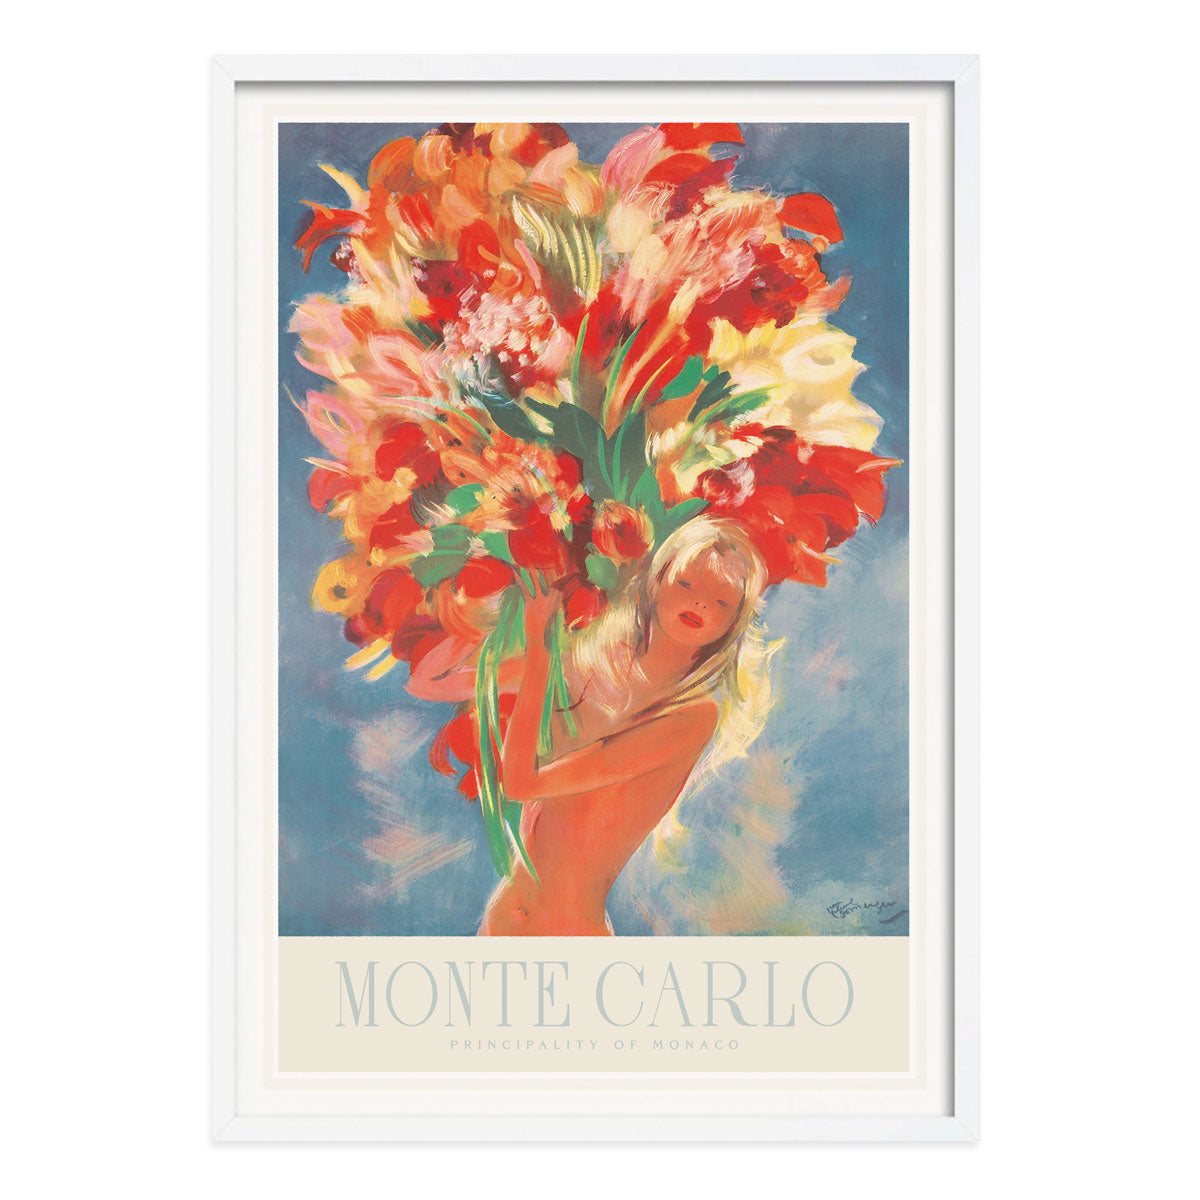 Monte Carlo Flowers retro vintage travel poster print in white frame from Places We Luv